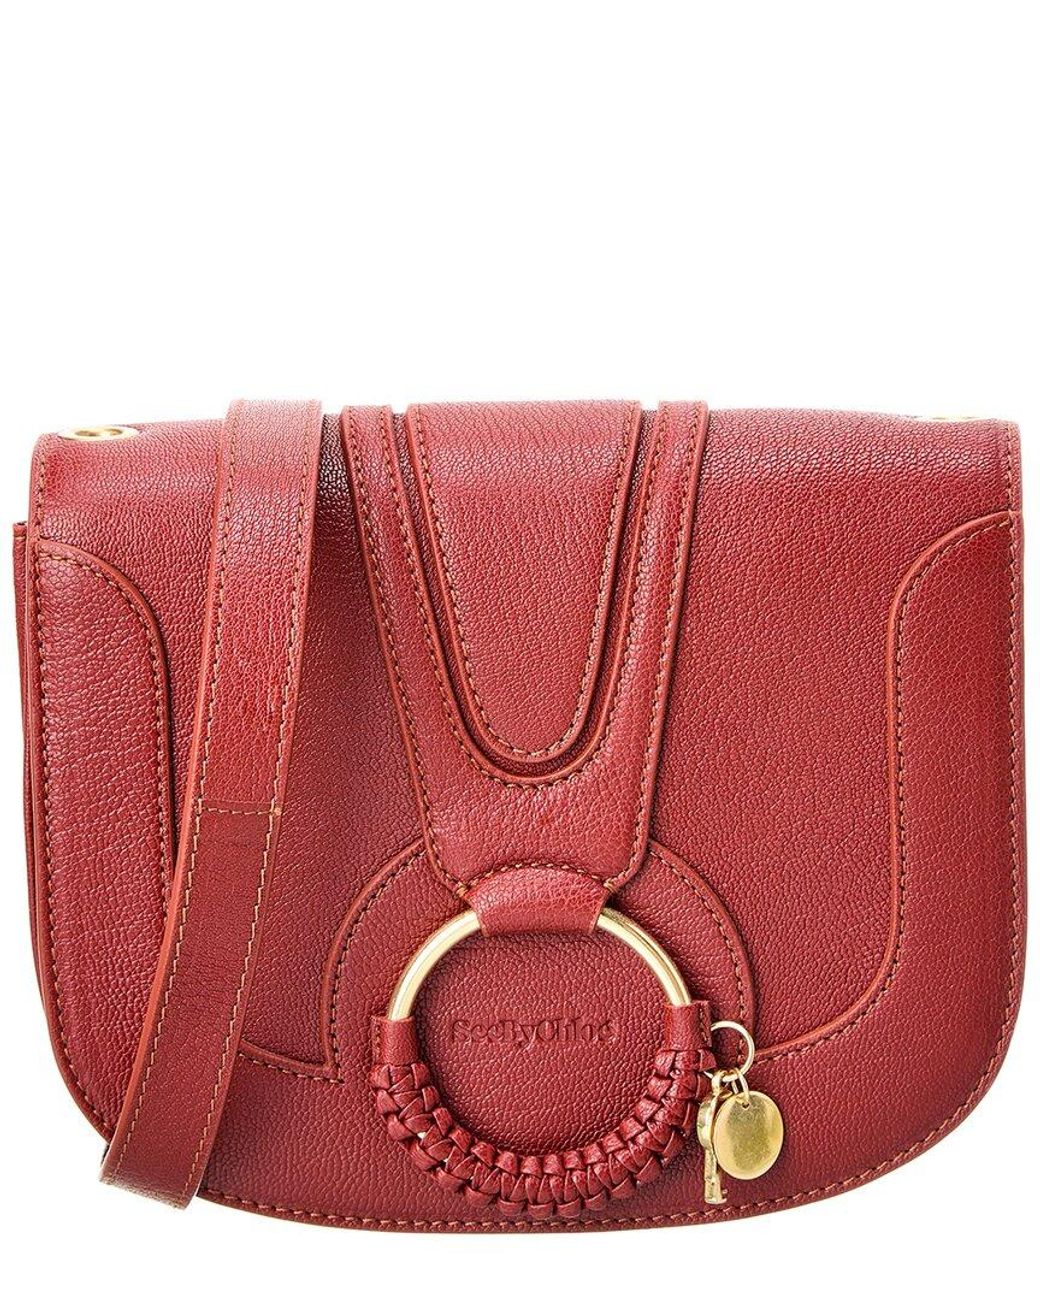 See By Chloé Hana Leather Shoulder Bag in Red | Lyst